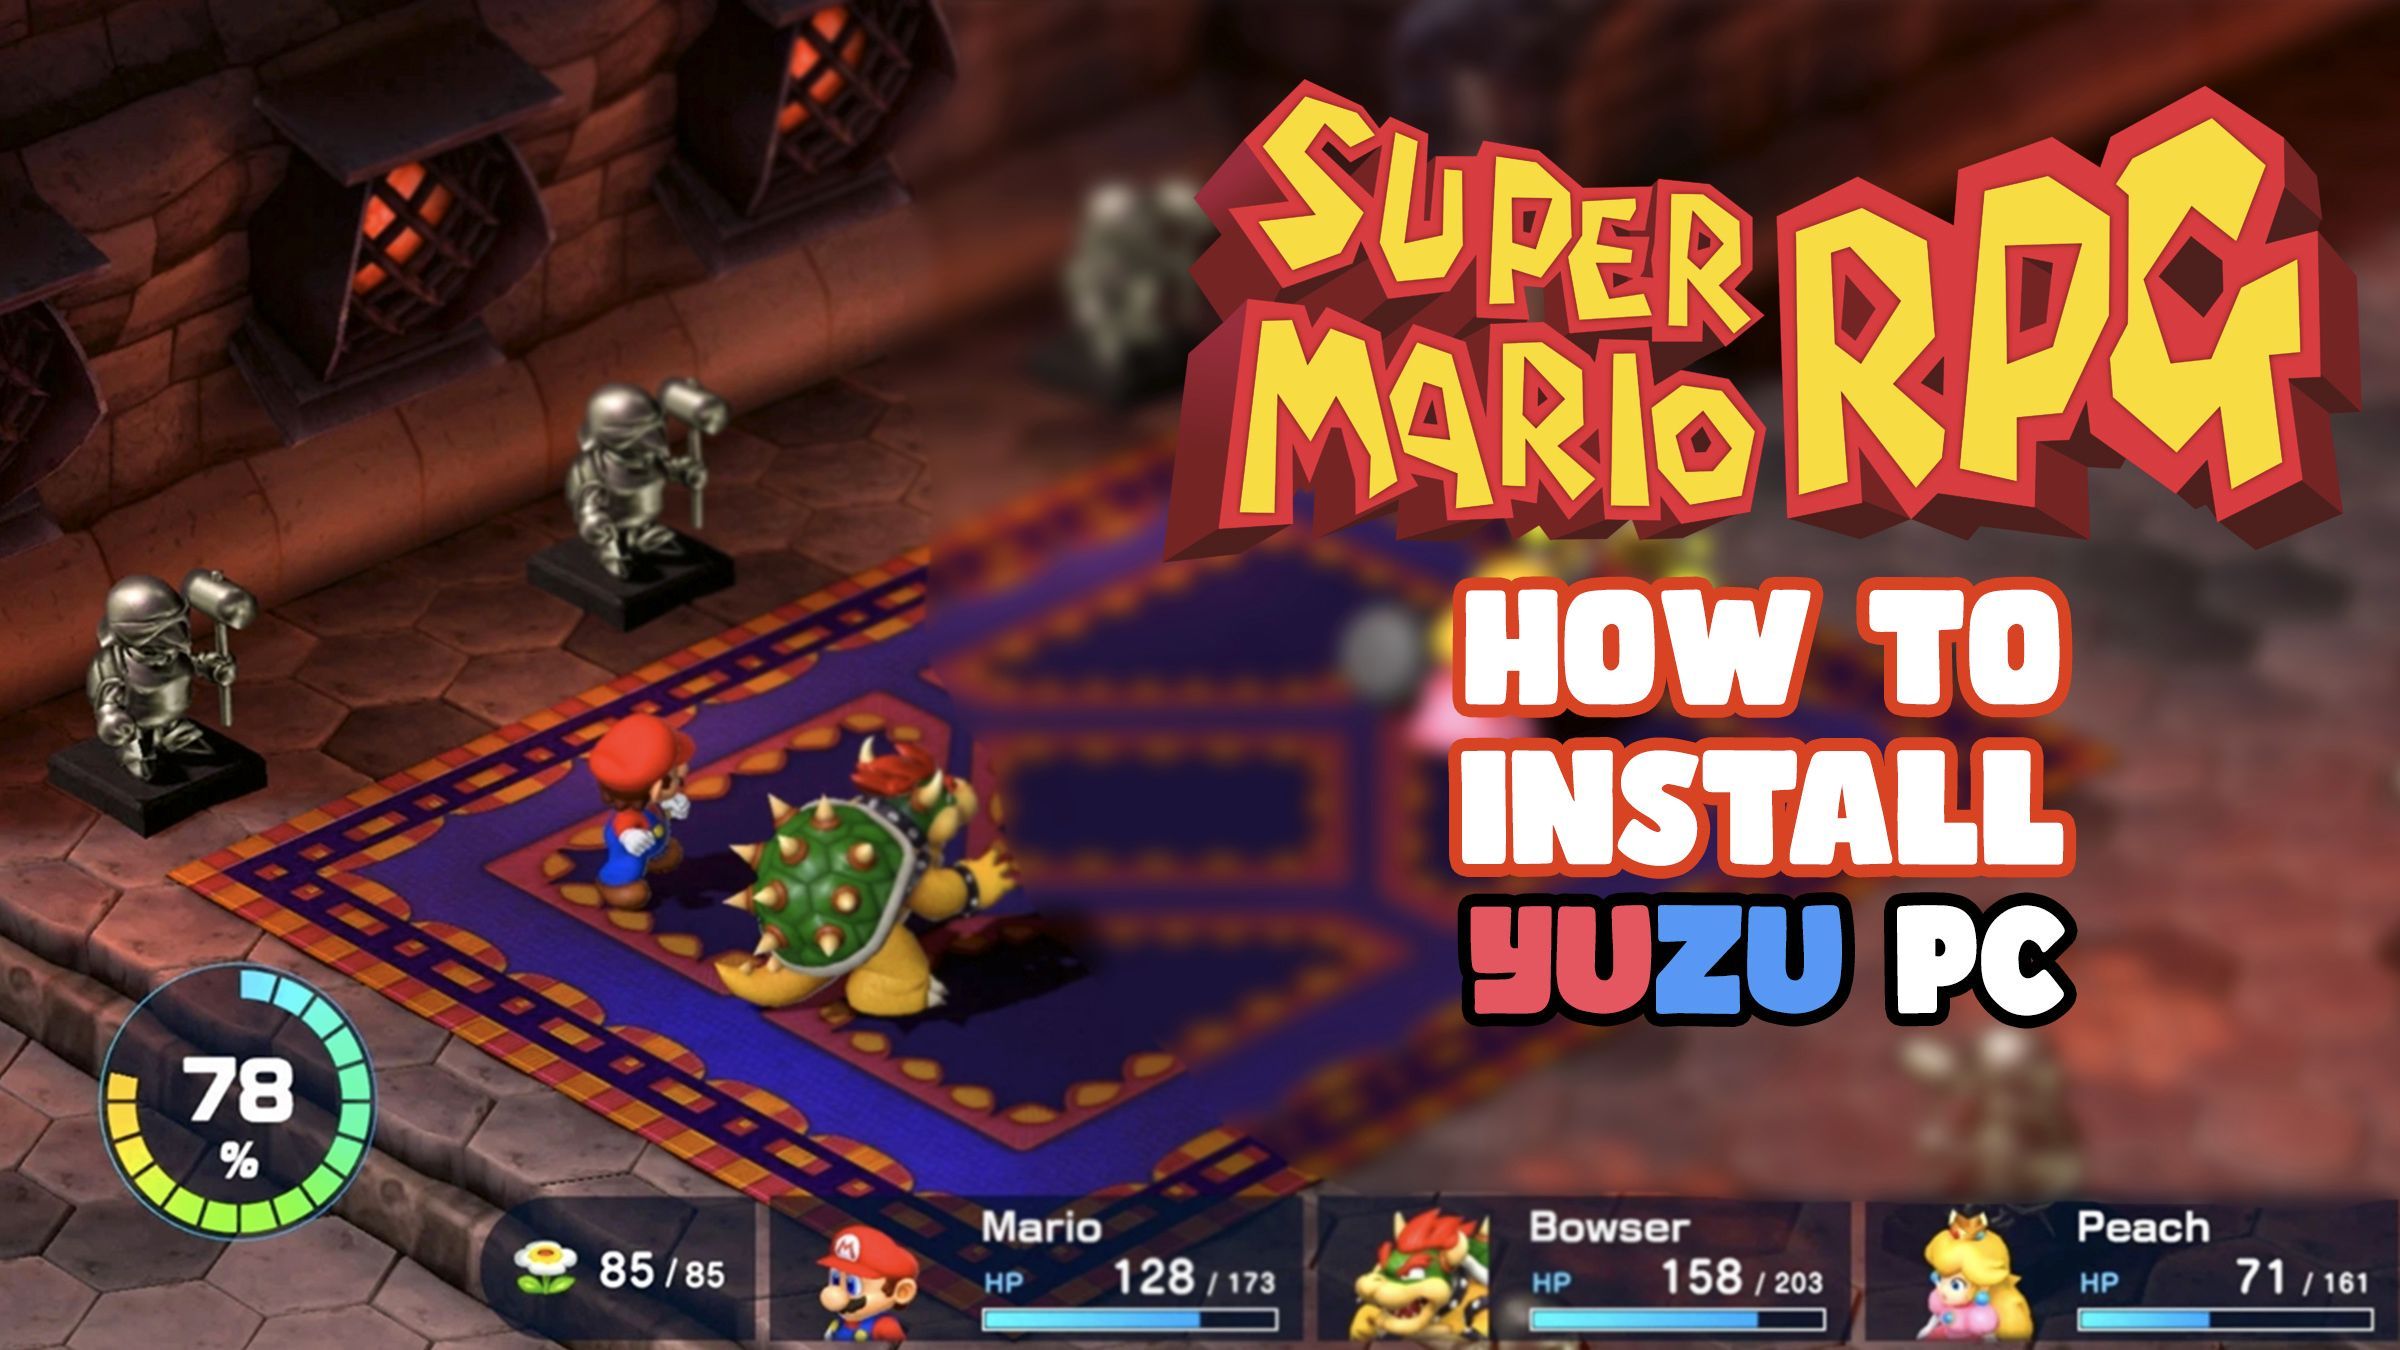 Super Mario RPG Leaks and is Already Being Played on PC Via Yuzu